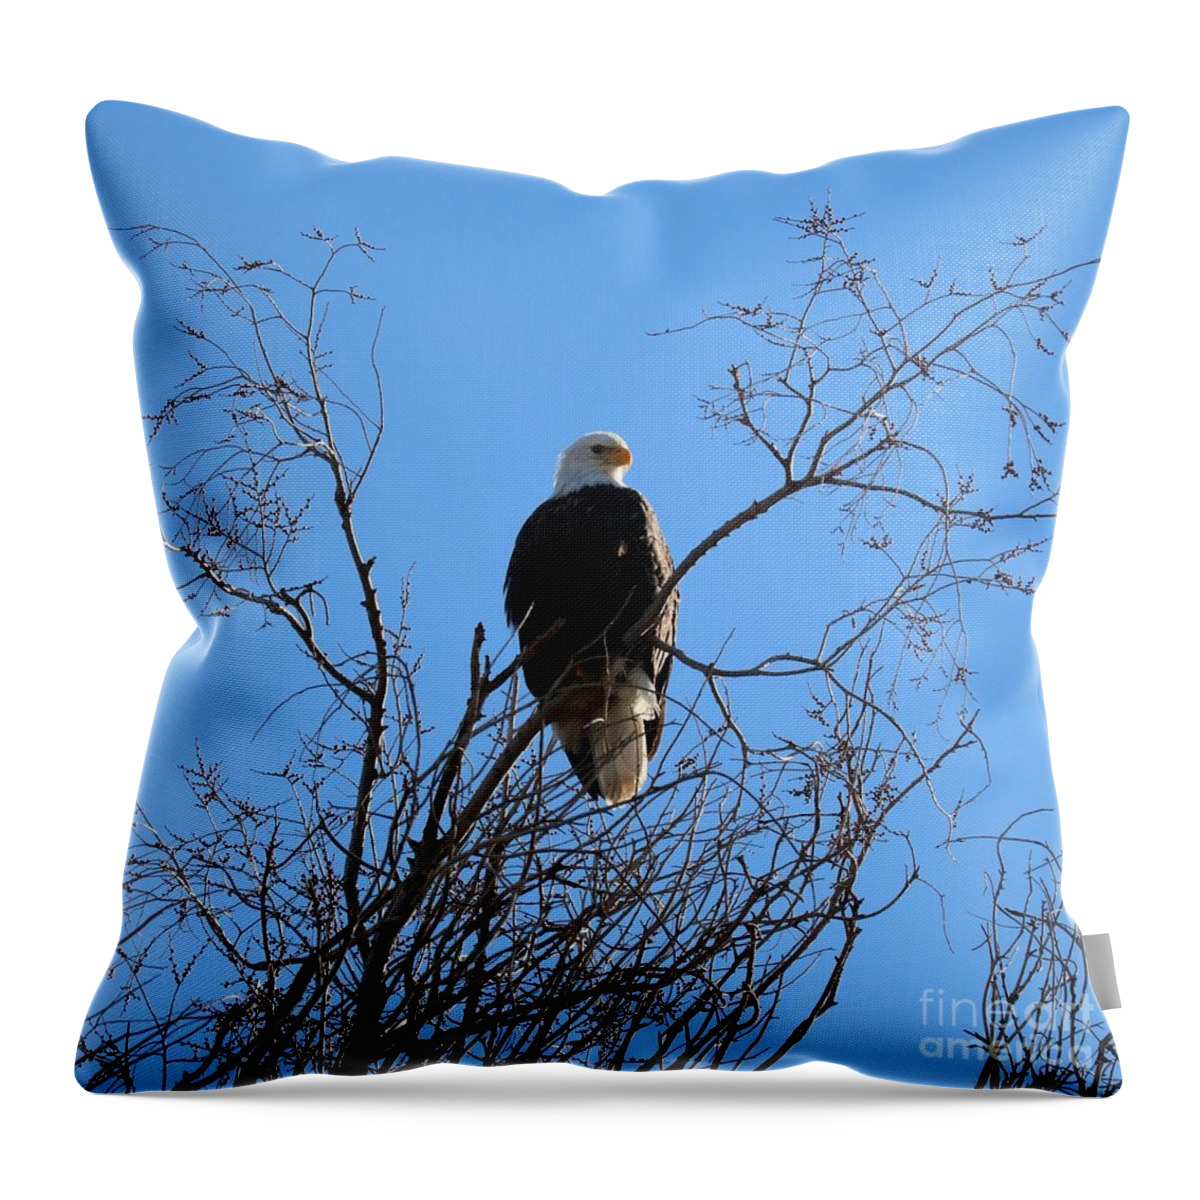 Bald Eagle Throw Pillow featuring the photograph Regal Bald Eagle Square by Carol Groenen